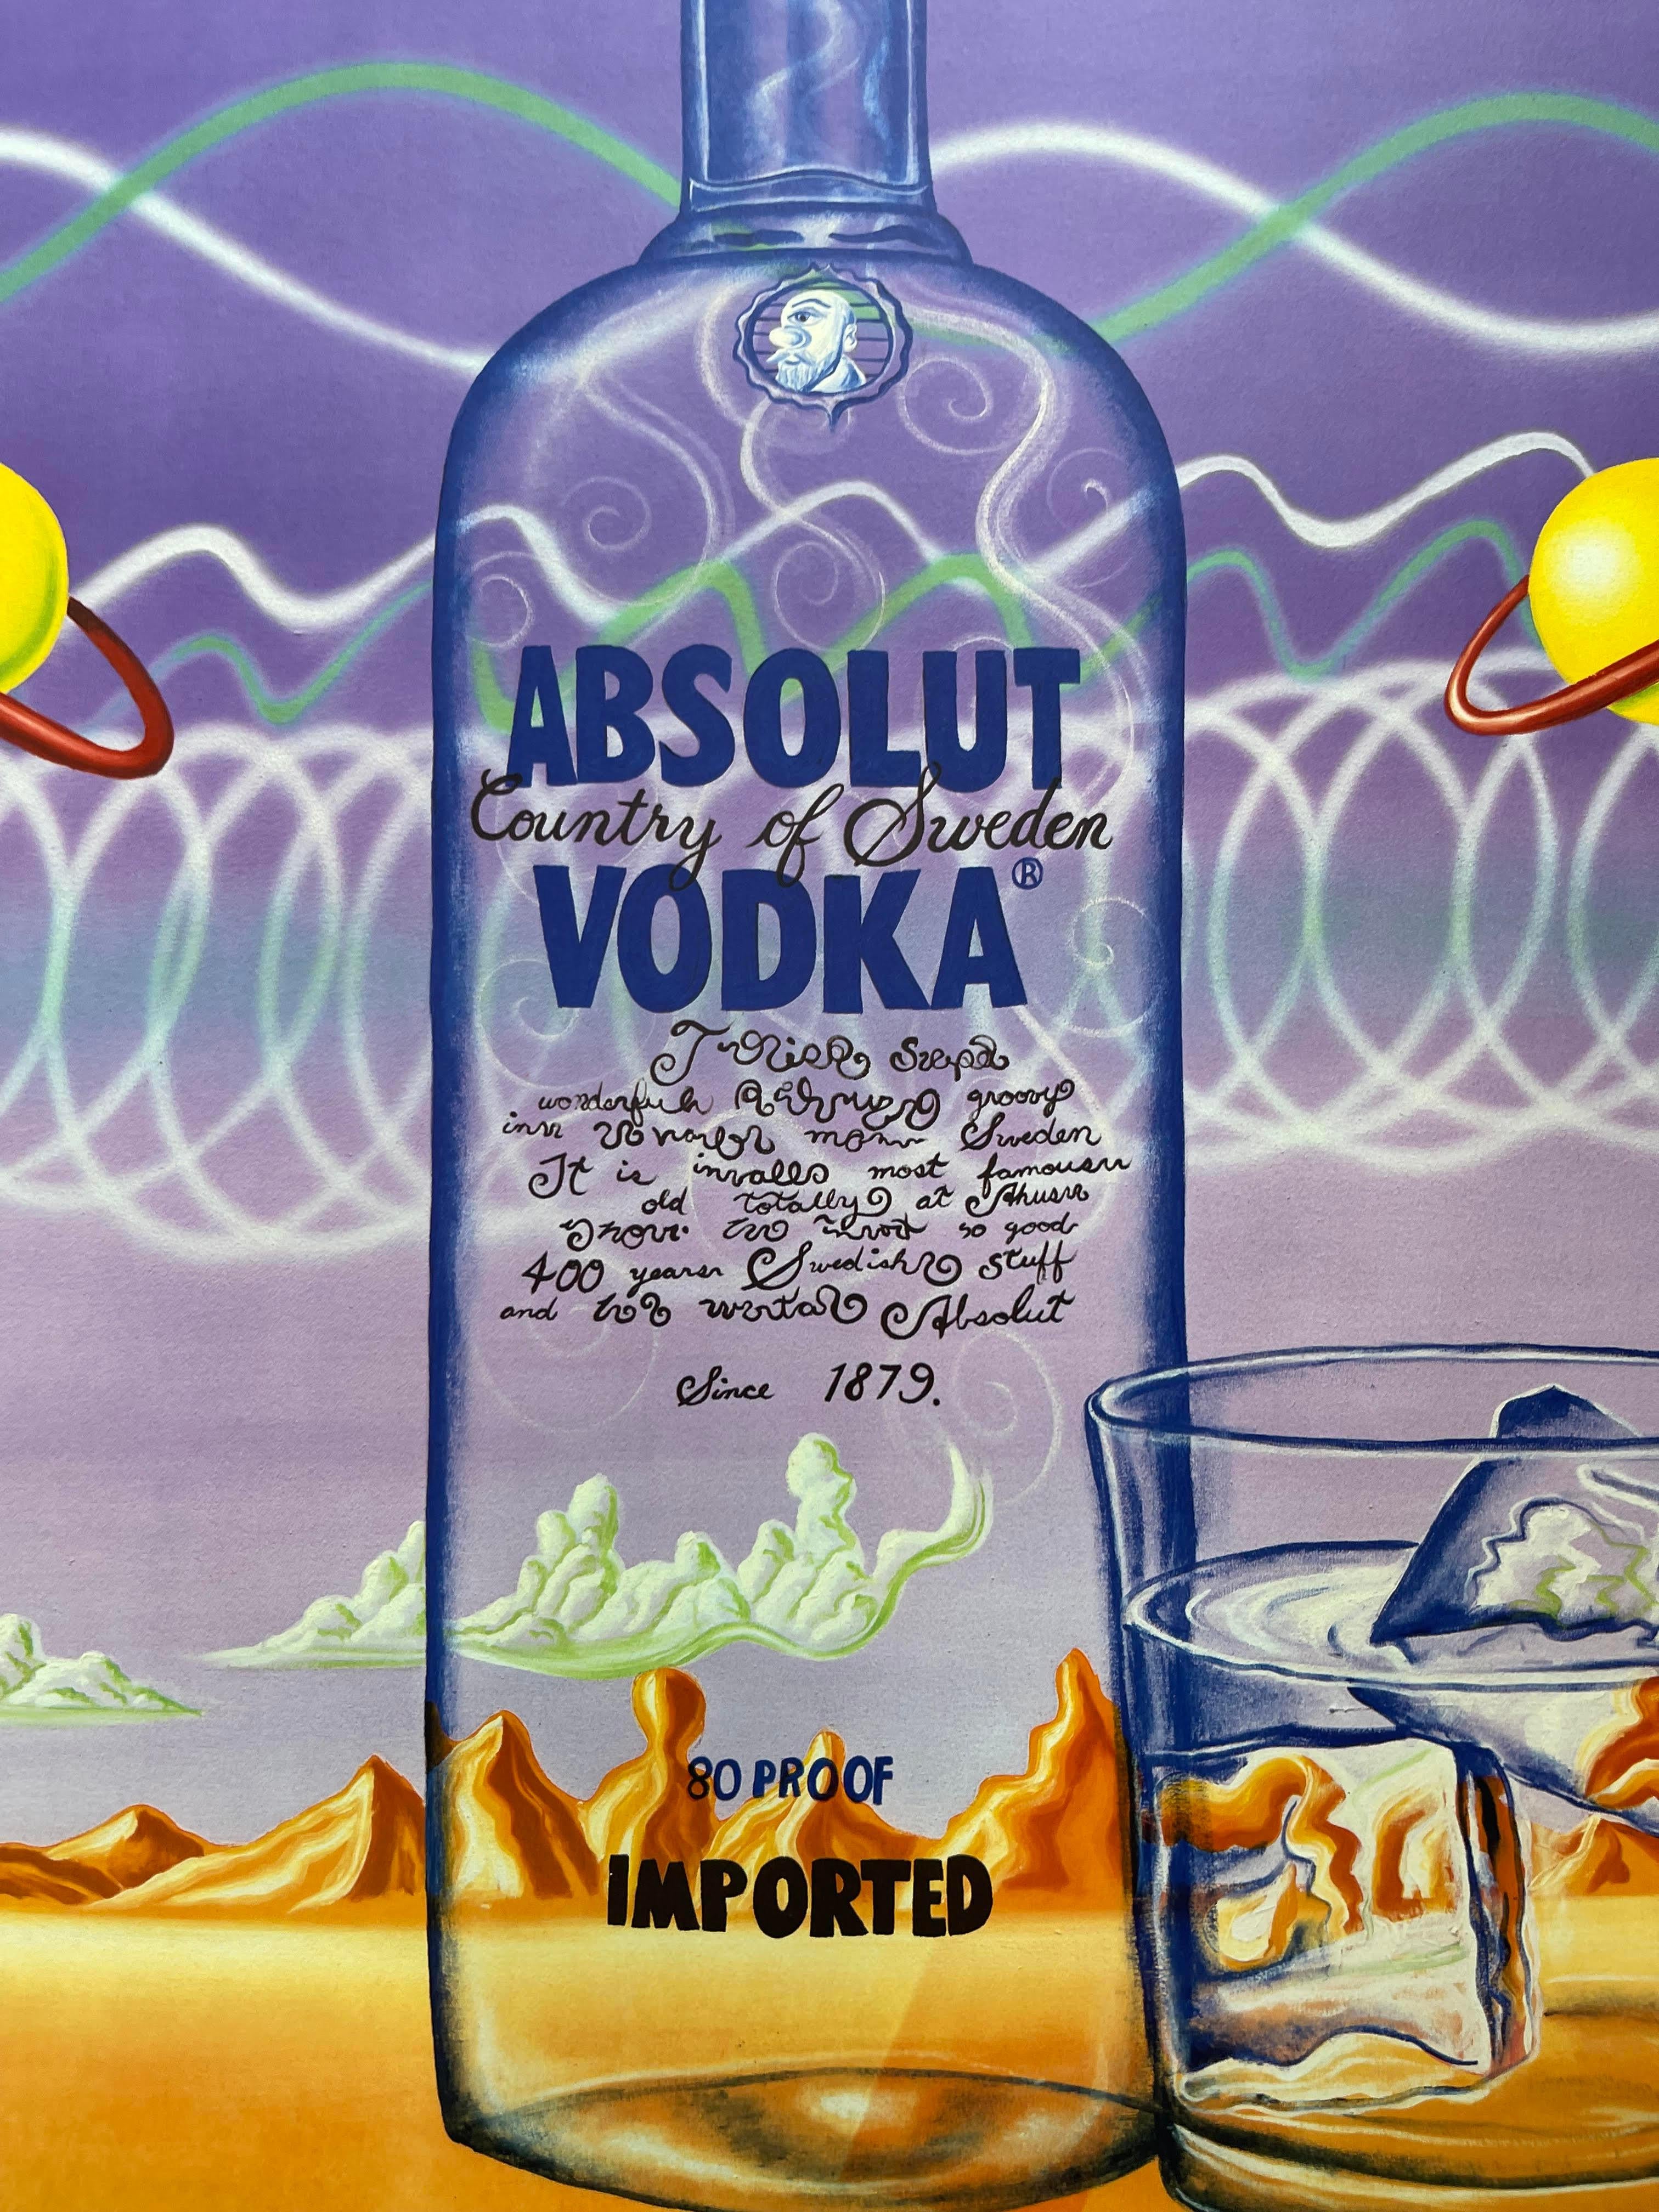 Kenny Scharf
Absolut Vodka, 1987
Offset Lithograph in colors on wove paper
Hand signed and dated by artist on lower right front
45 × 33 inches
Unframed
This rare vintage pencil signed limited Edition by Kenny Scharf lithograph was created as part of